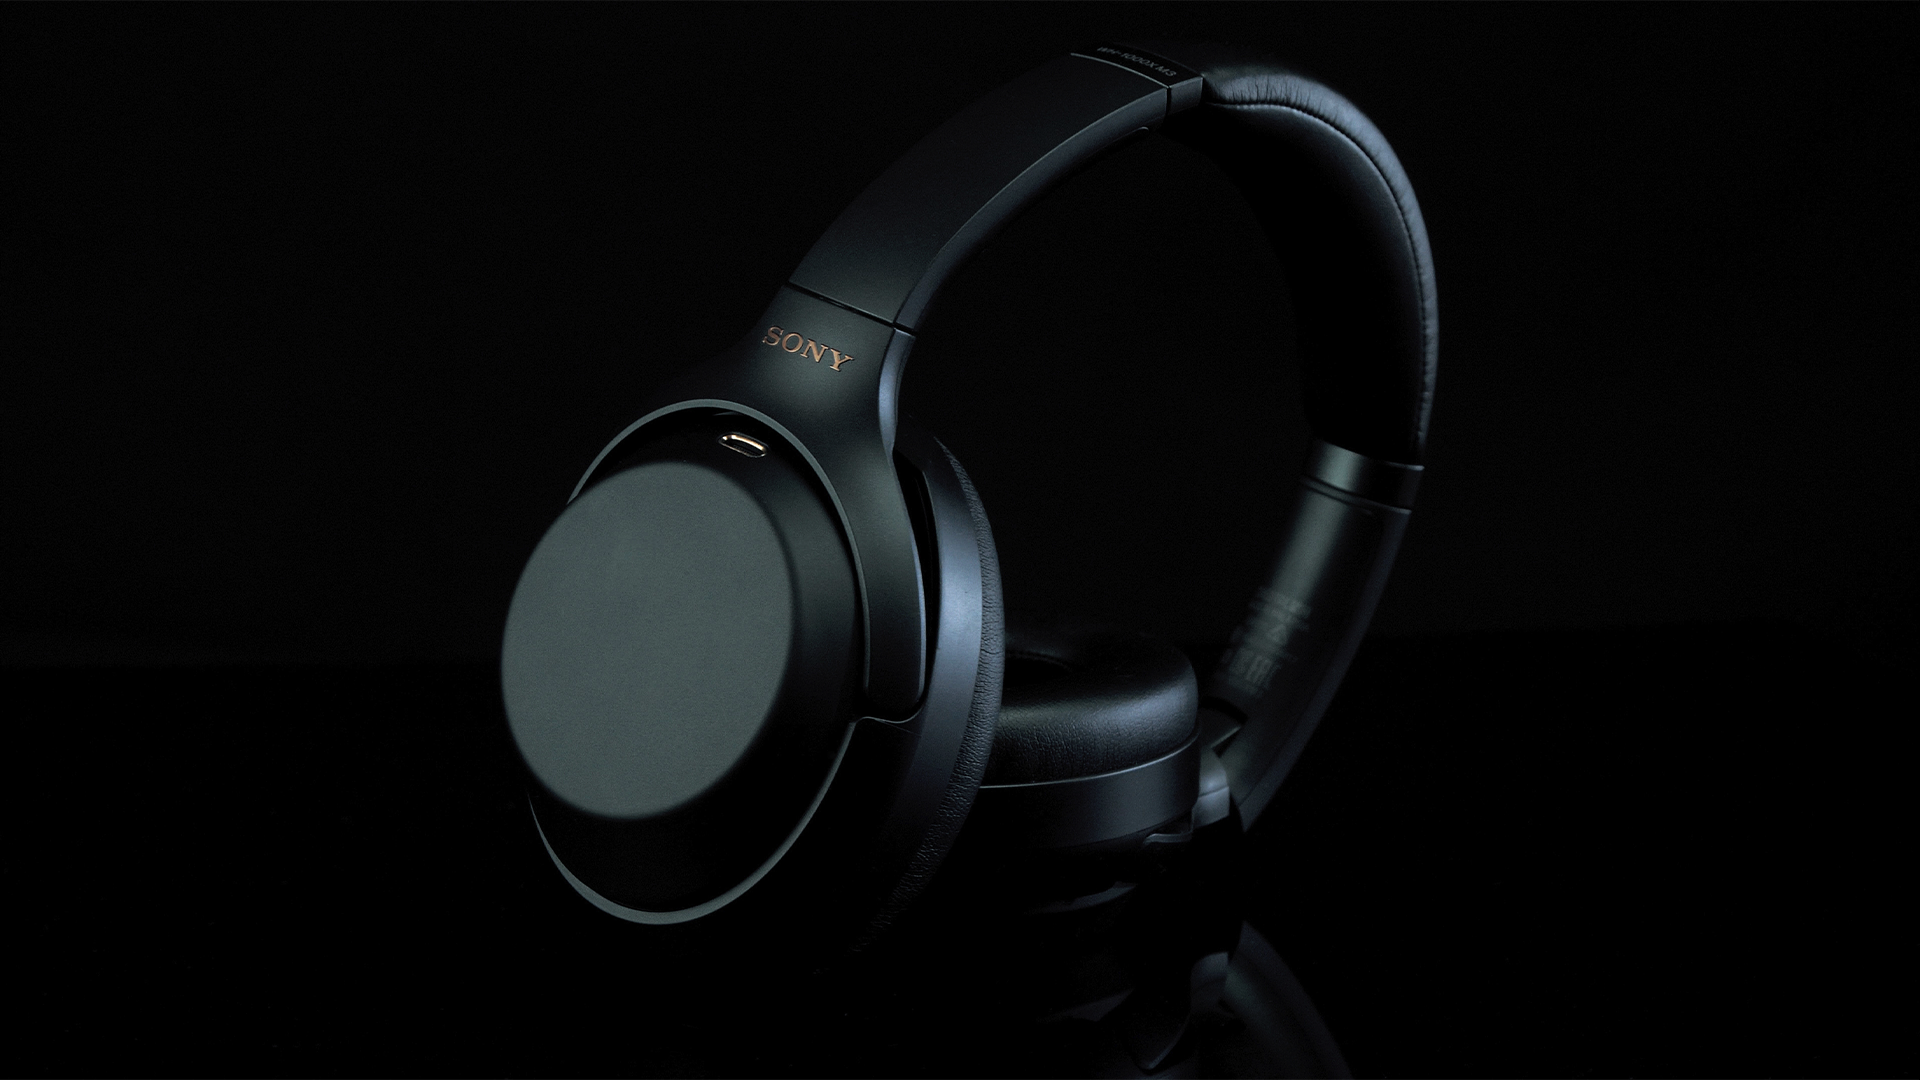 The Sony WH-1000XM3 headphones on a black background.